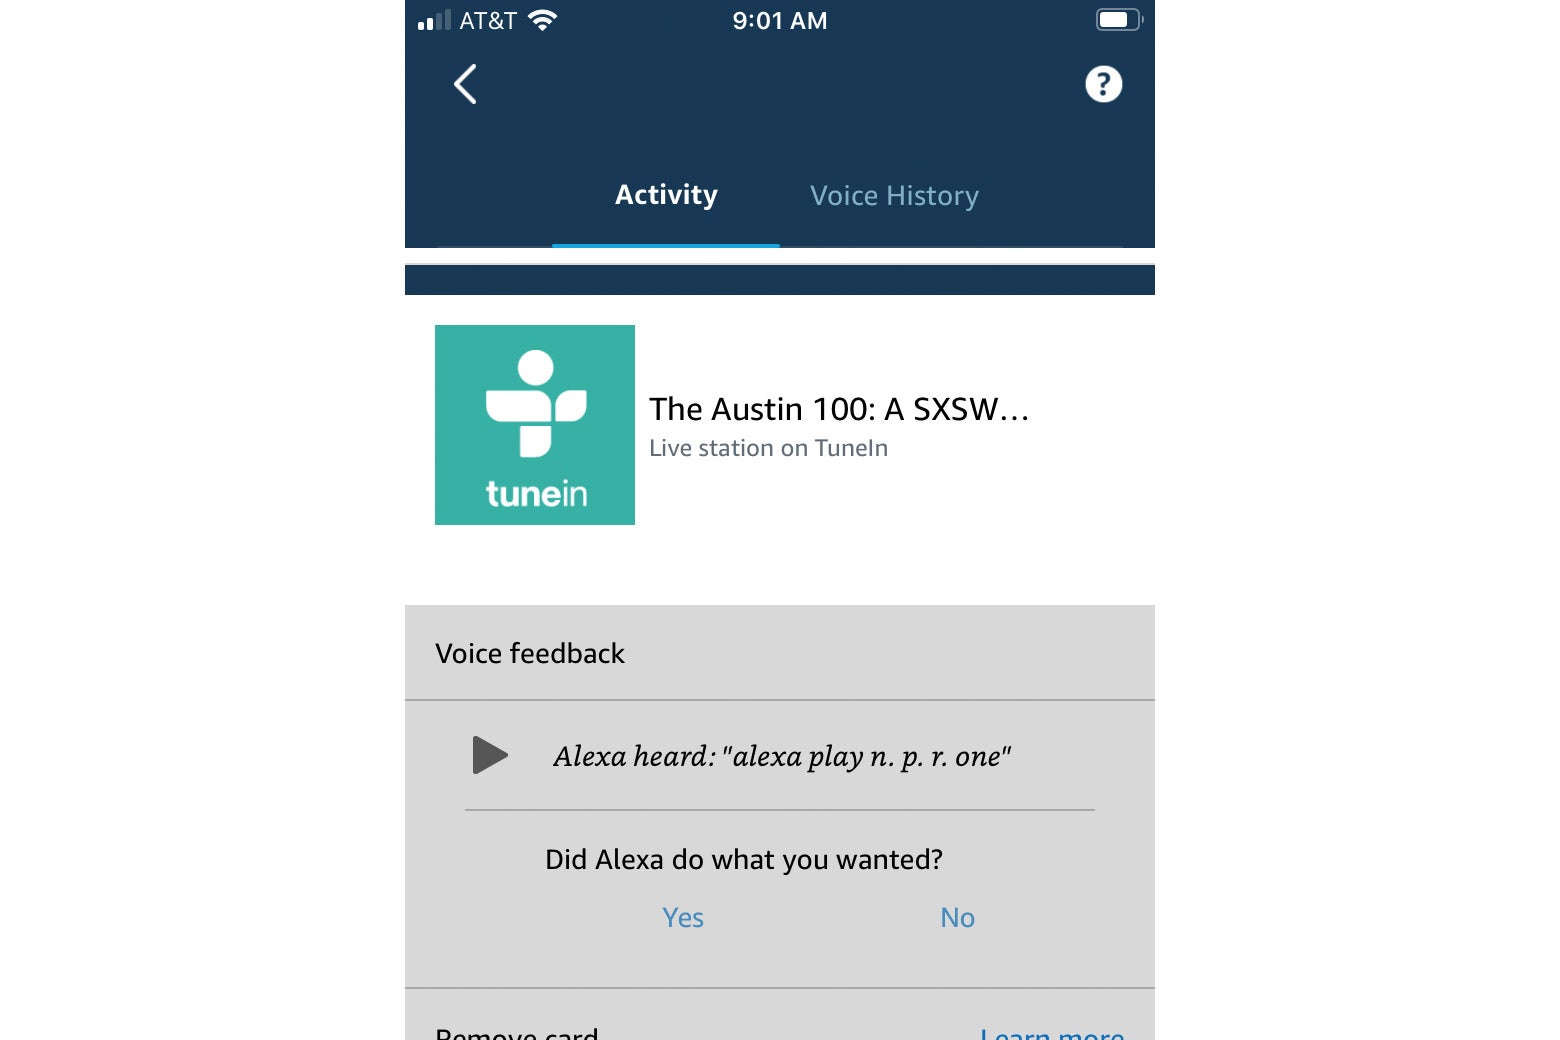 A screenshot from the Echo app shows it heard "Alexa play NPR One" but the action taken was playing The Austin 100.